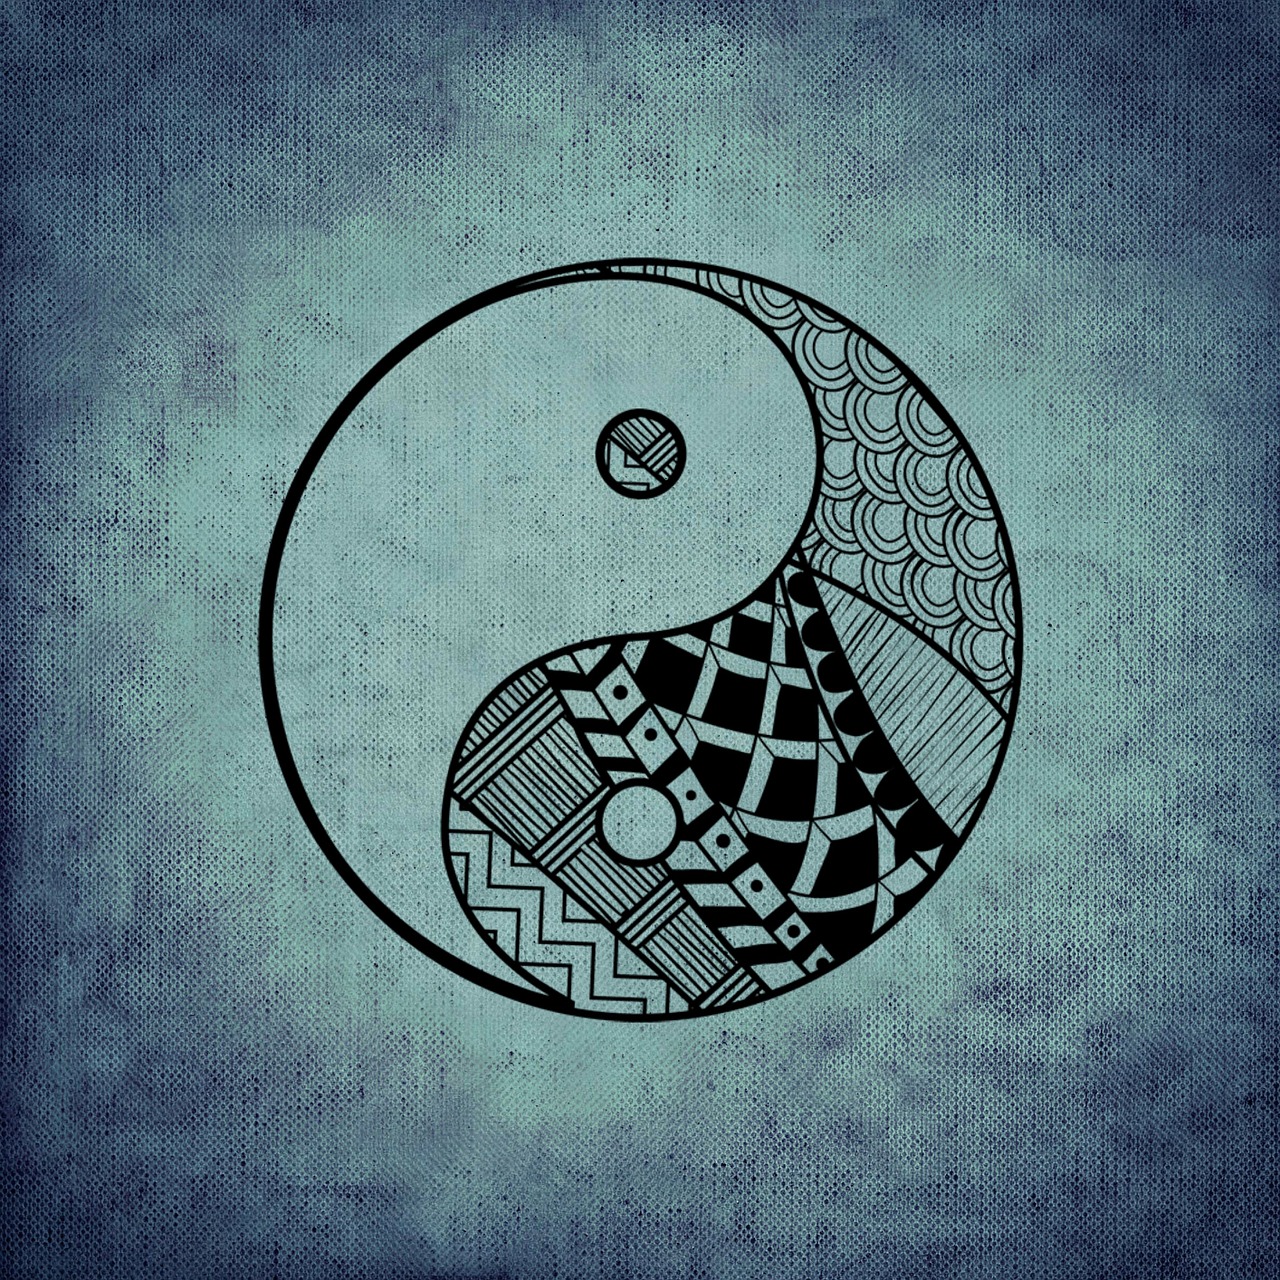 yin and yang counterpart supplement free photo